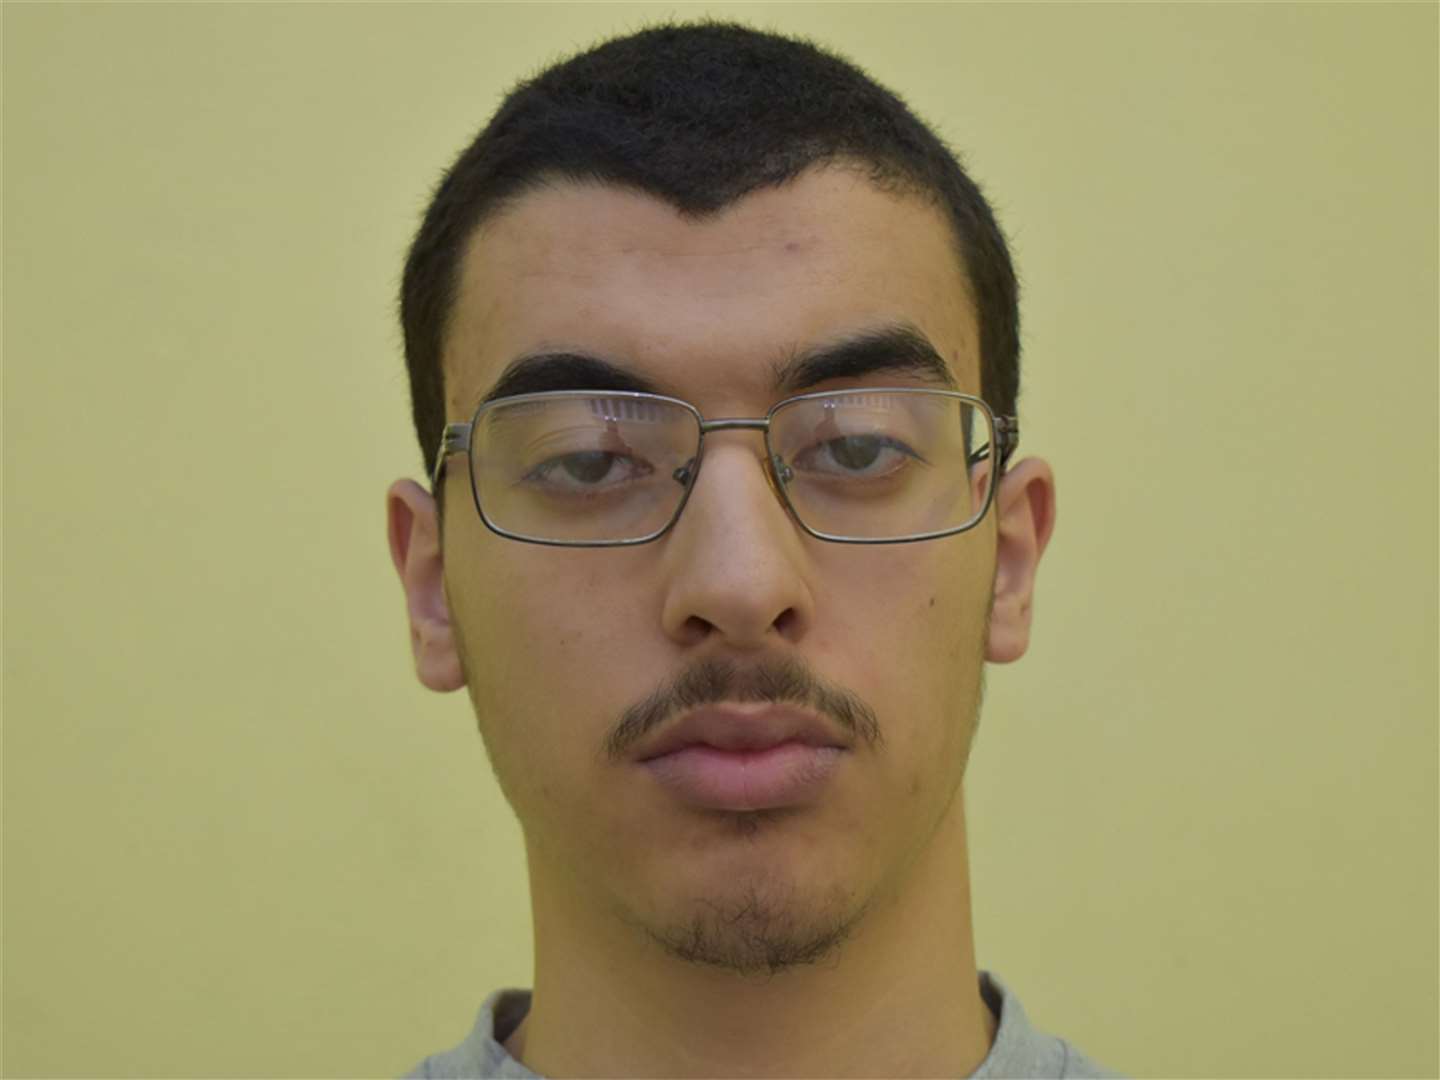 Hashem Abedi (Greater Manchester Police/PA)